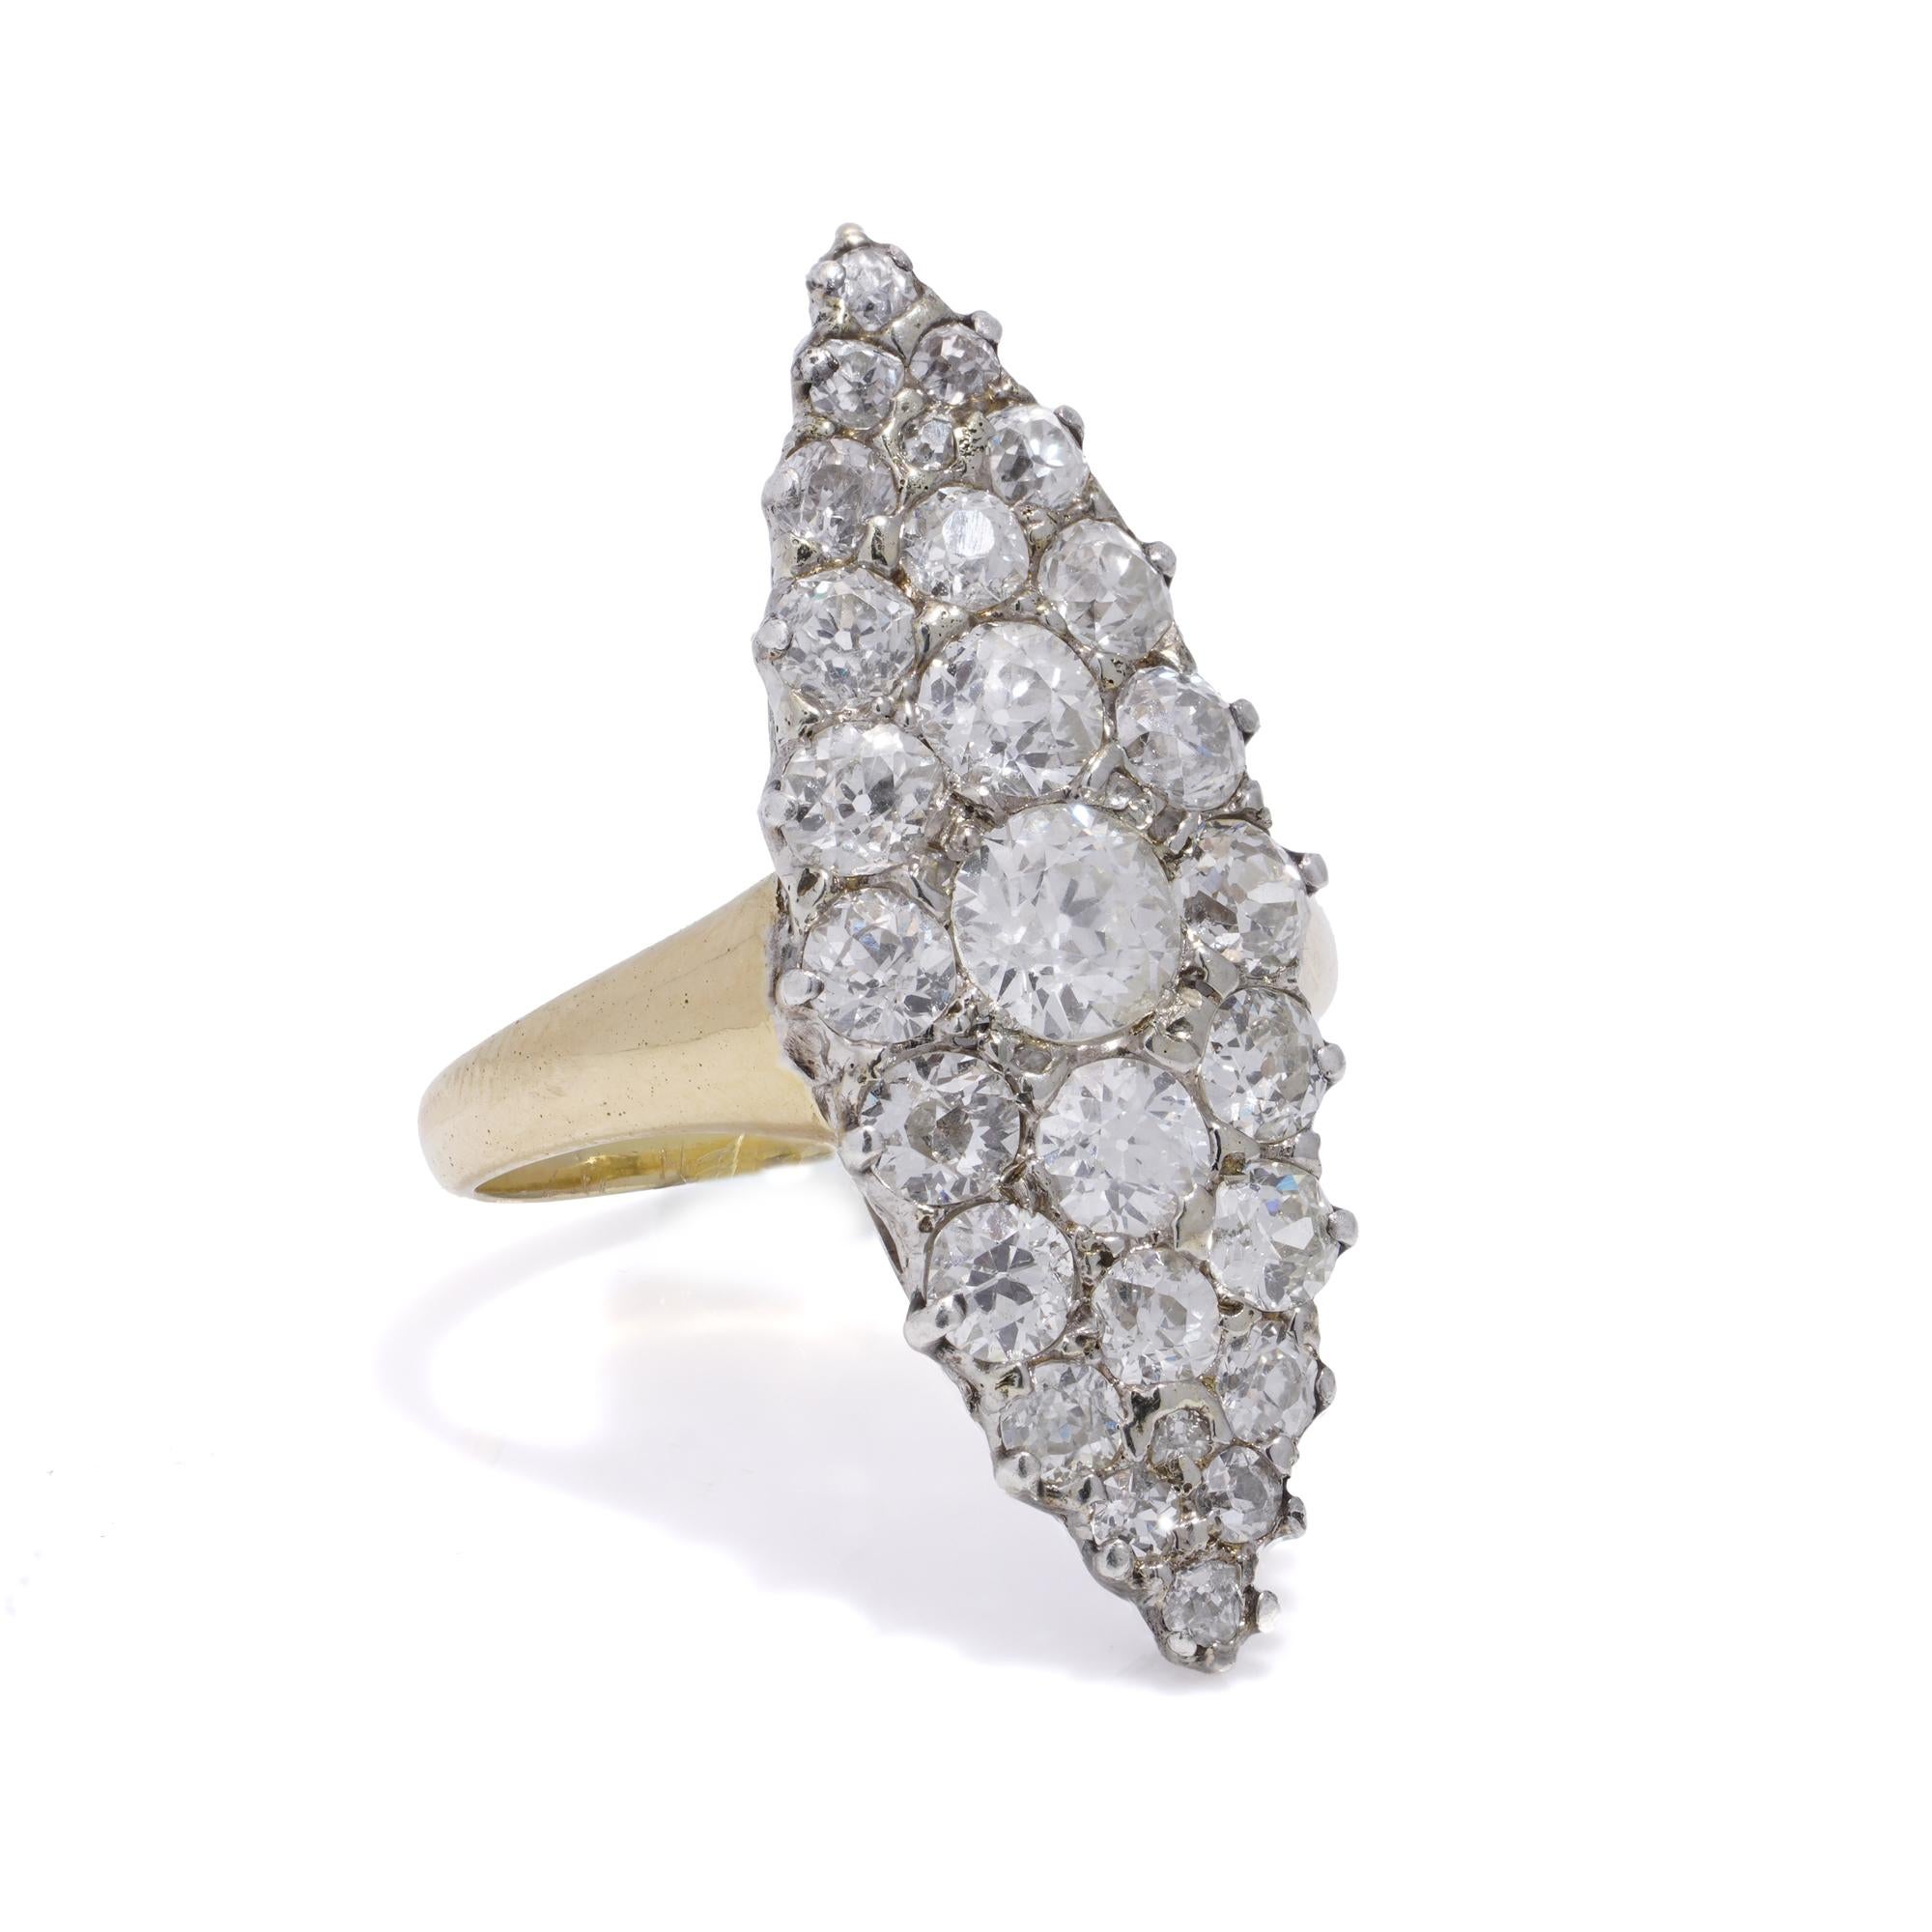 Presenting an antique Victorian marquise-shaped cluster ring crafted in 18kt yellow gold and silver, featuring stunning Old-European cut diamonds.
Made in England, circa 1890s
Hallmarked for 18kt gold.

Dimensions -
Finger Size (UK) = N ( EU) = 55